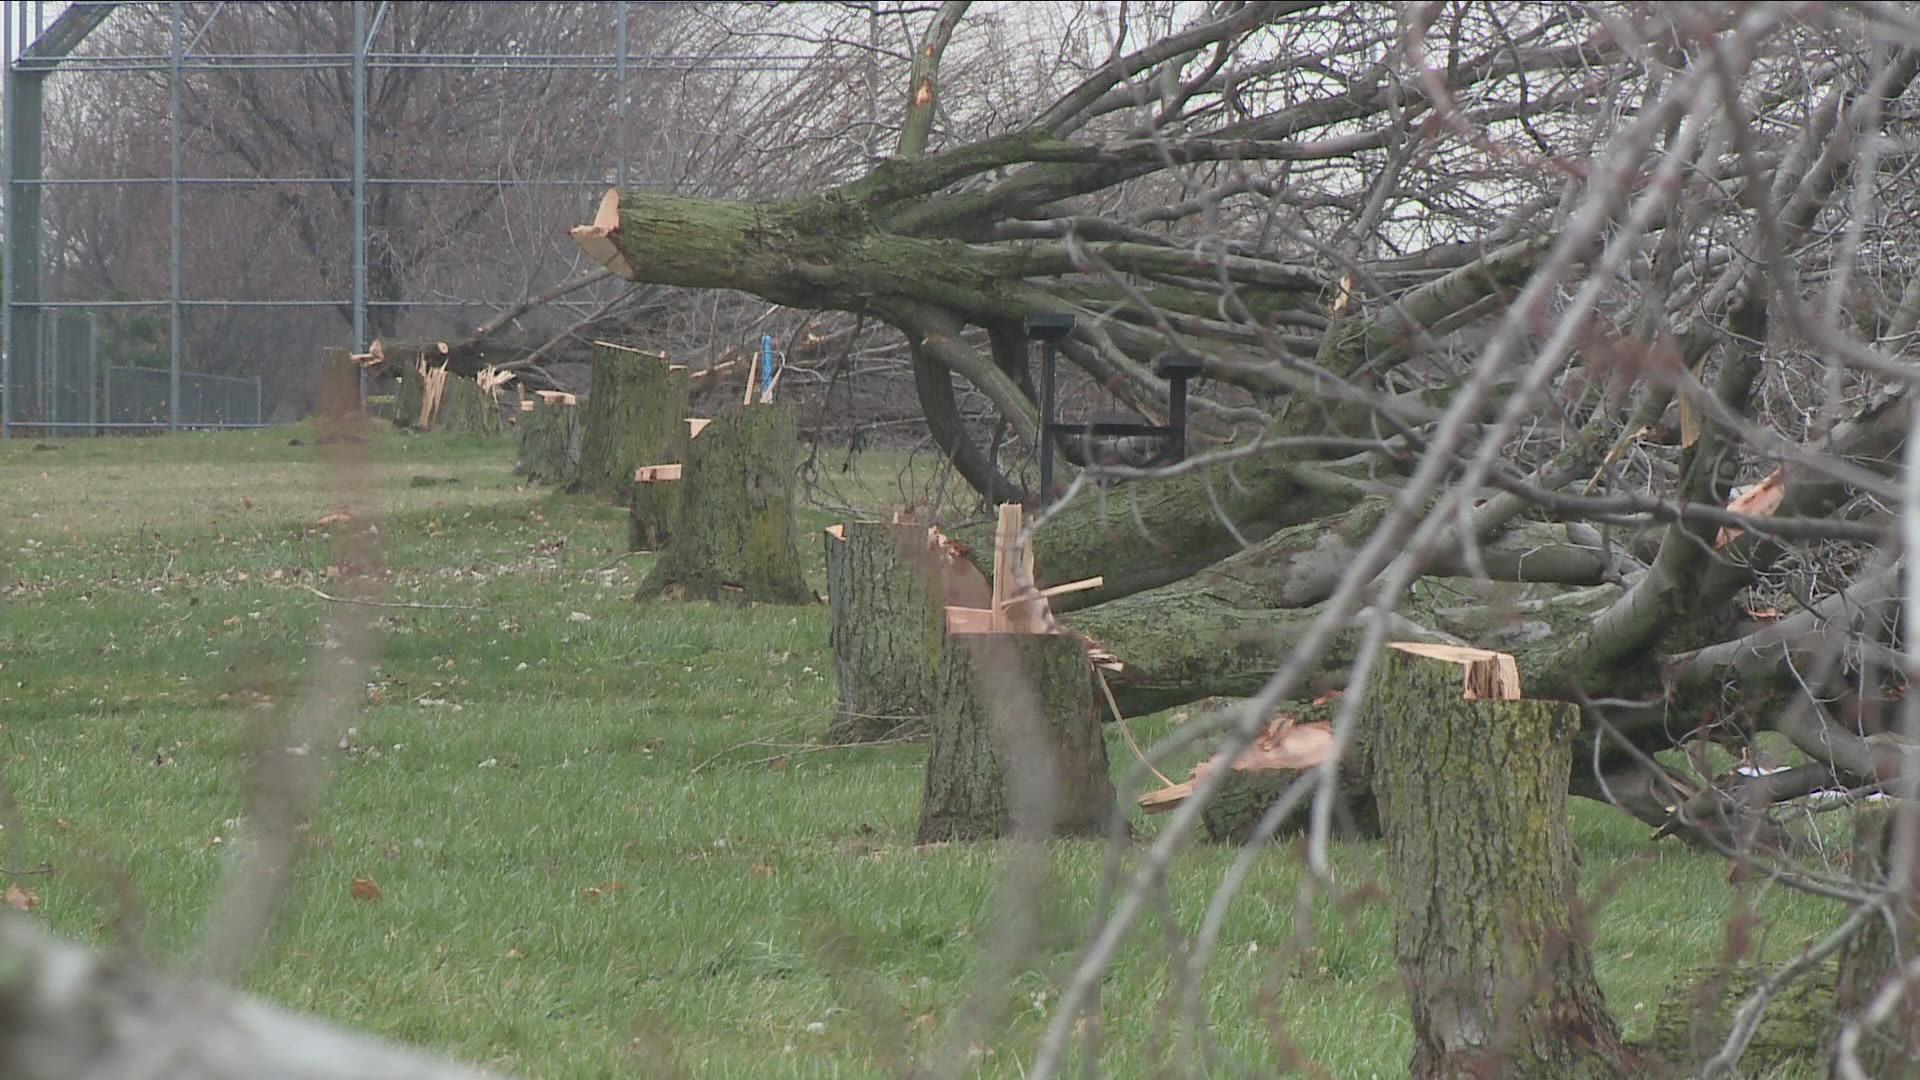 The City of Buffalo says thousands of trees will be planted to replace them.